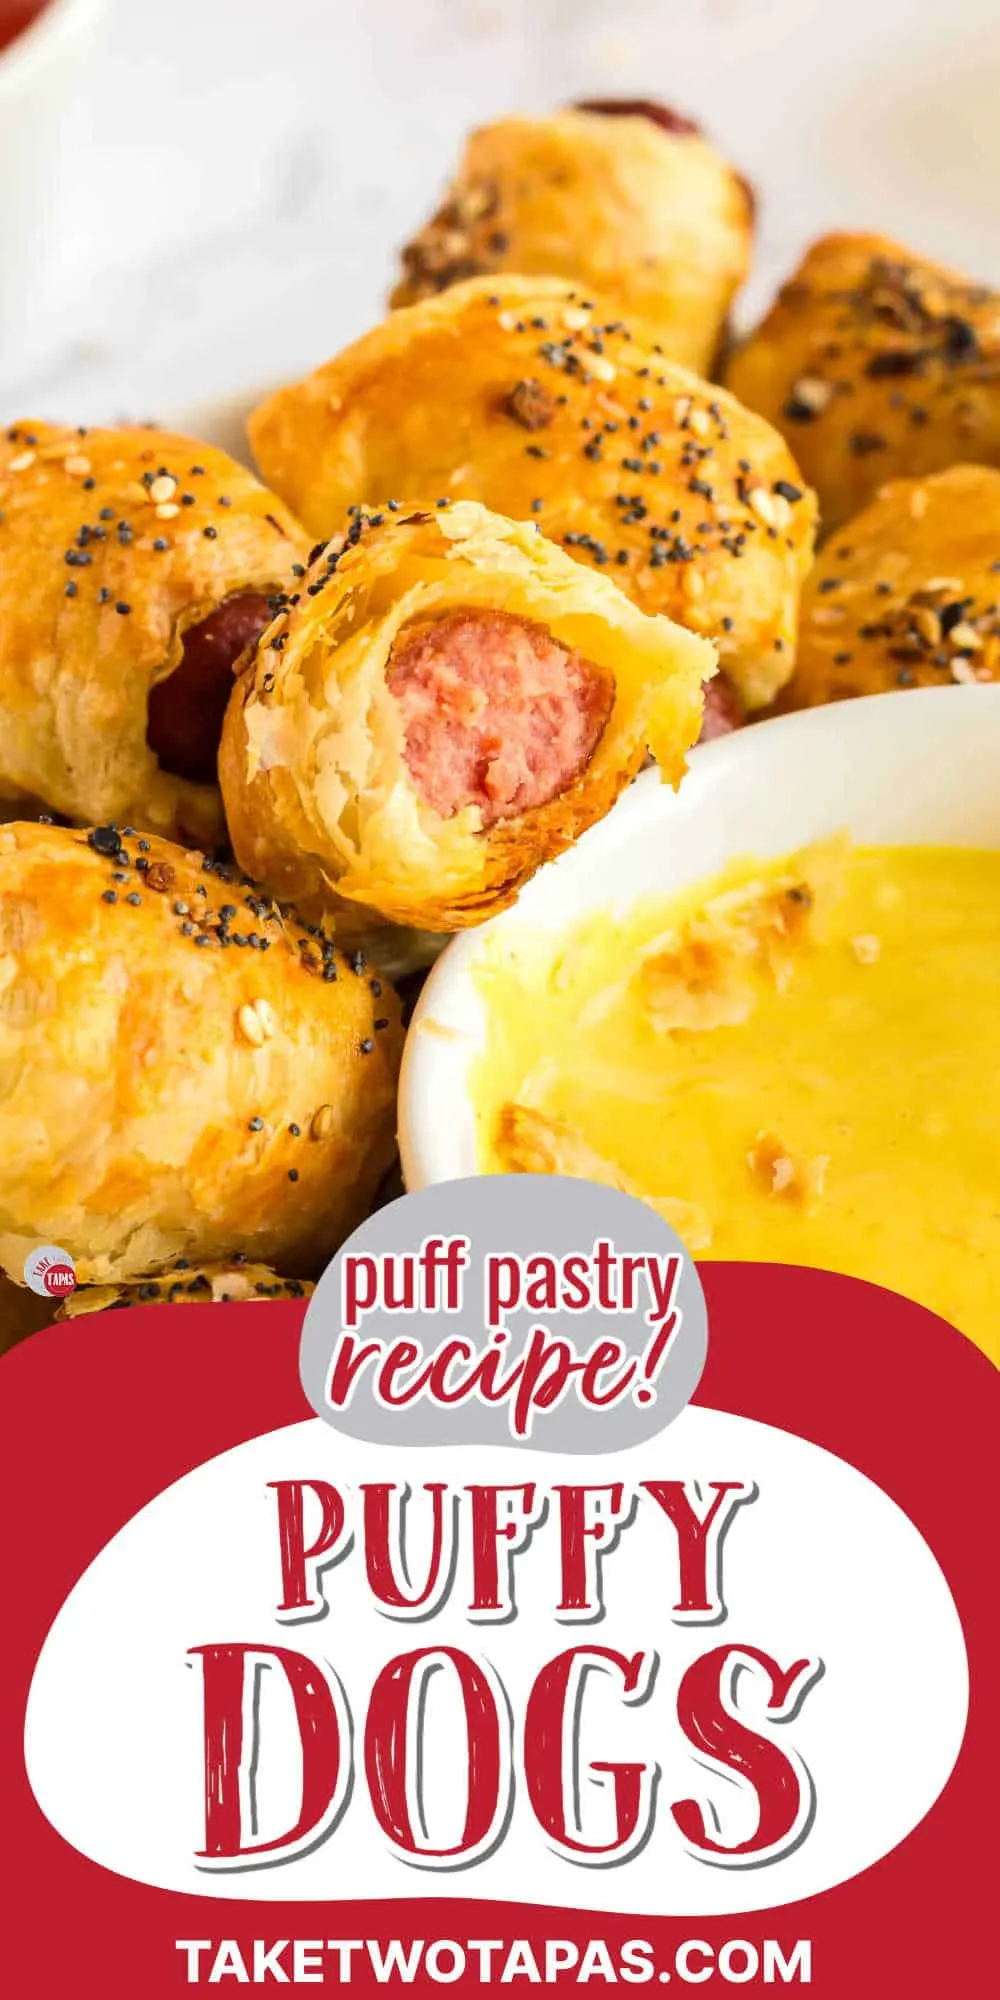 mini puff pastry dogs with text "puff pastry pigs in a blanket"